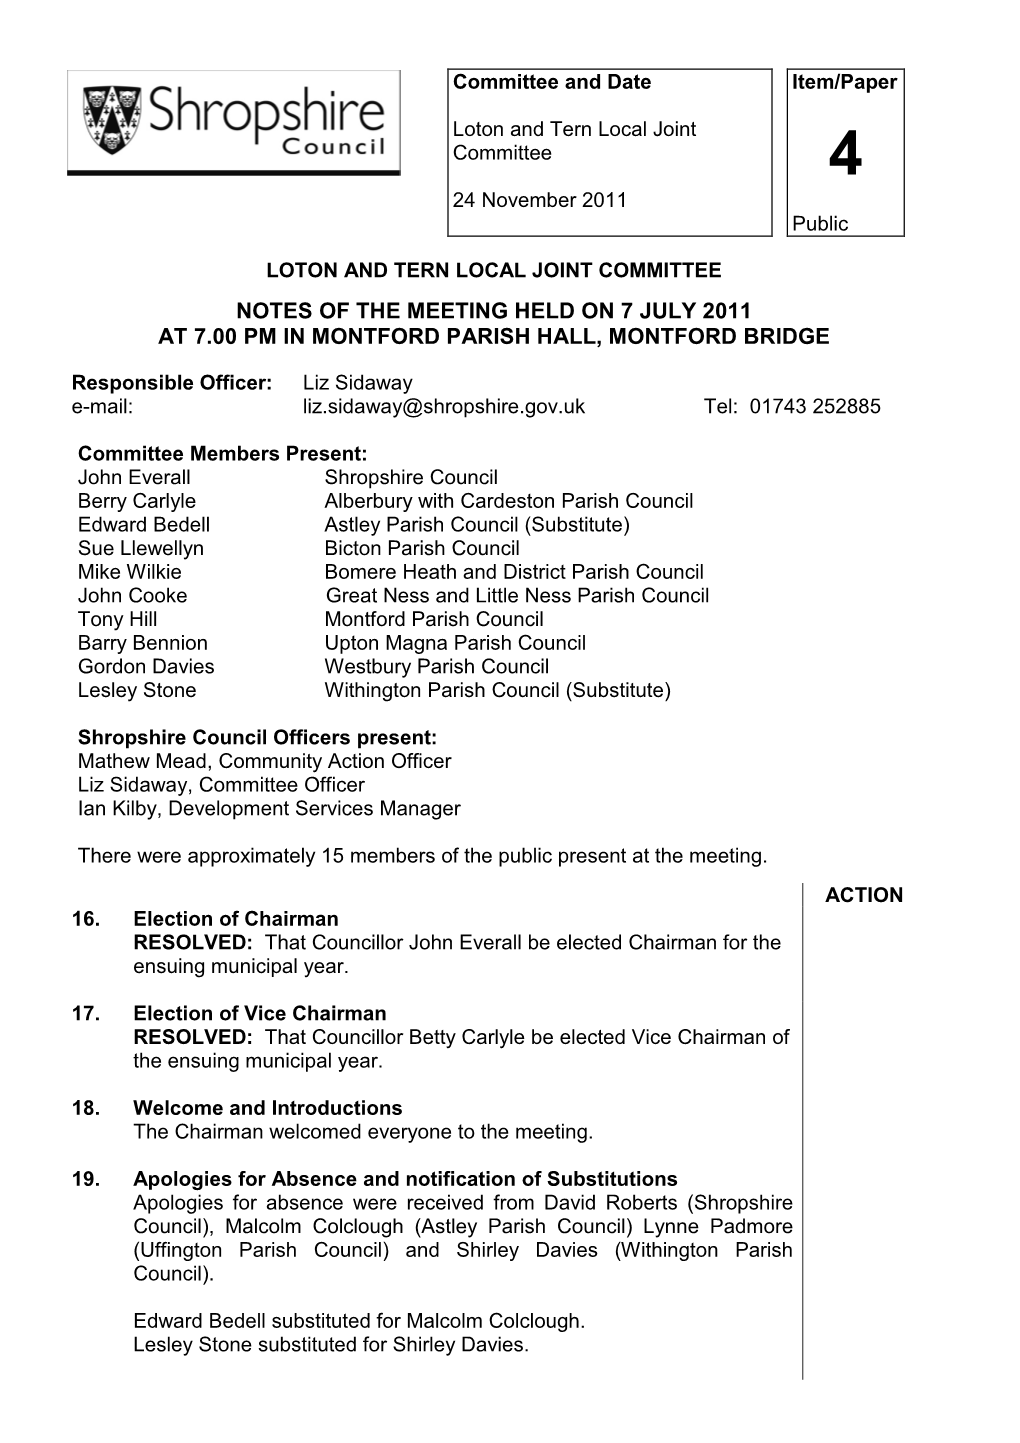 Notes of the Meeting Held on 7 July 2011 at 7.00 Pm in Montford Parish Hall, Montford Bridge